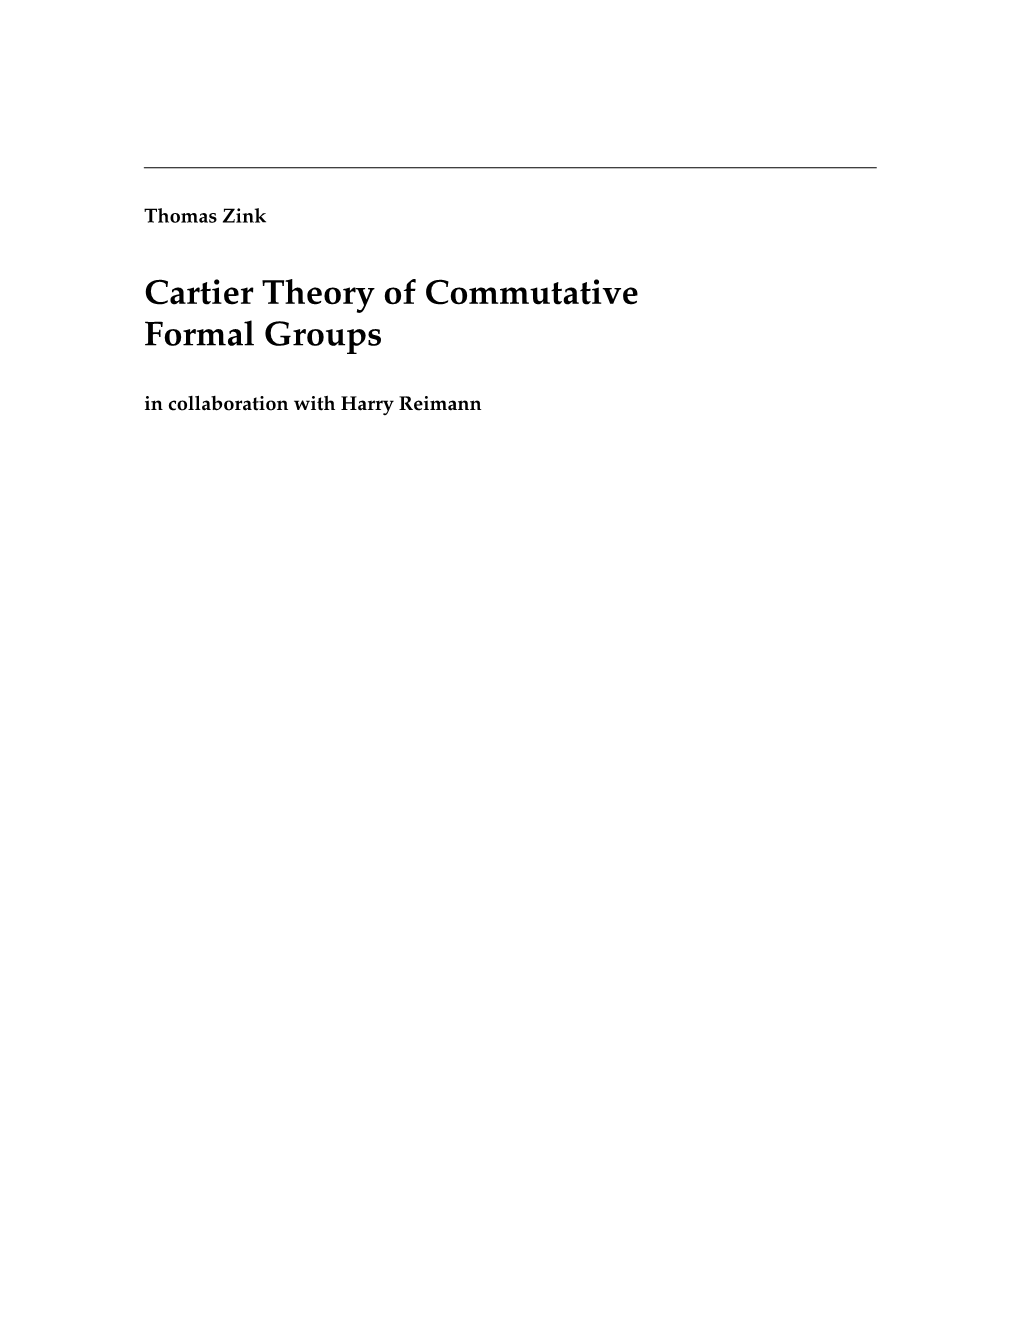 Cartier Theory of Commutative Formal Groups in Collaboration with Harry Reimann 2